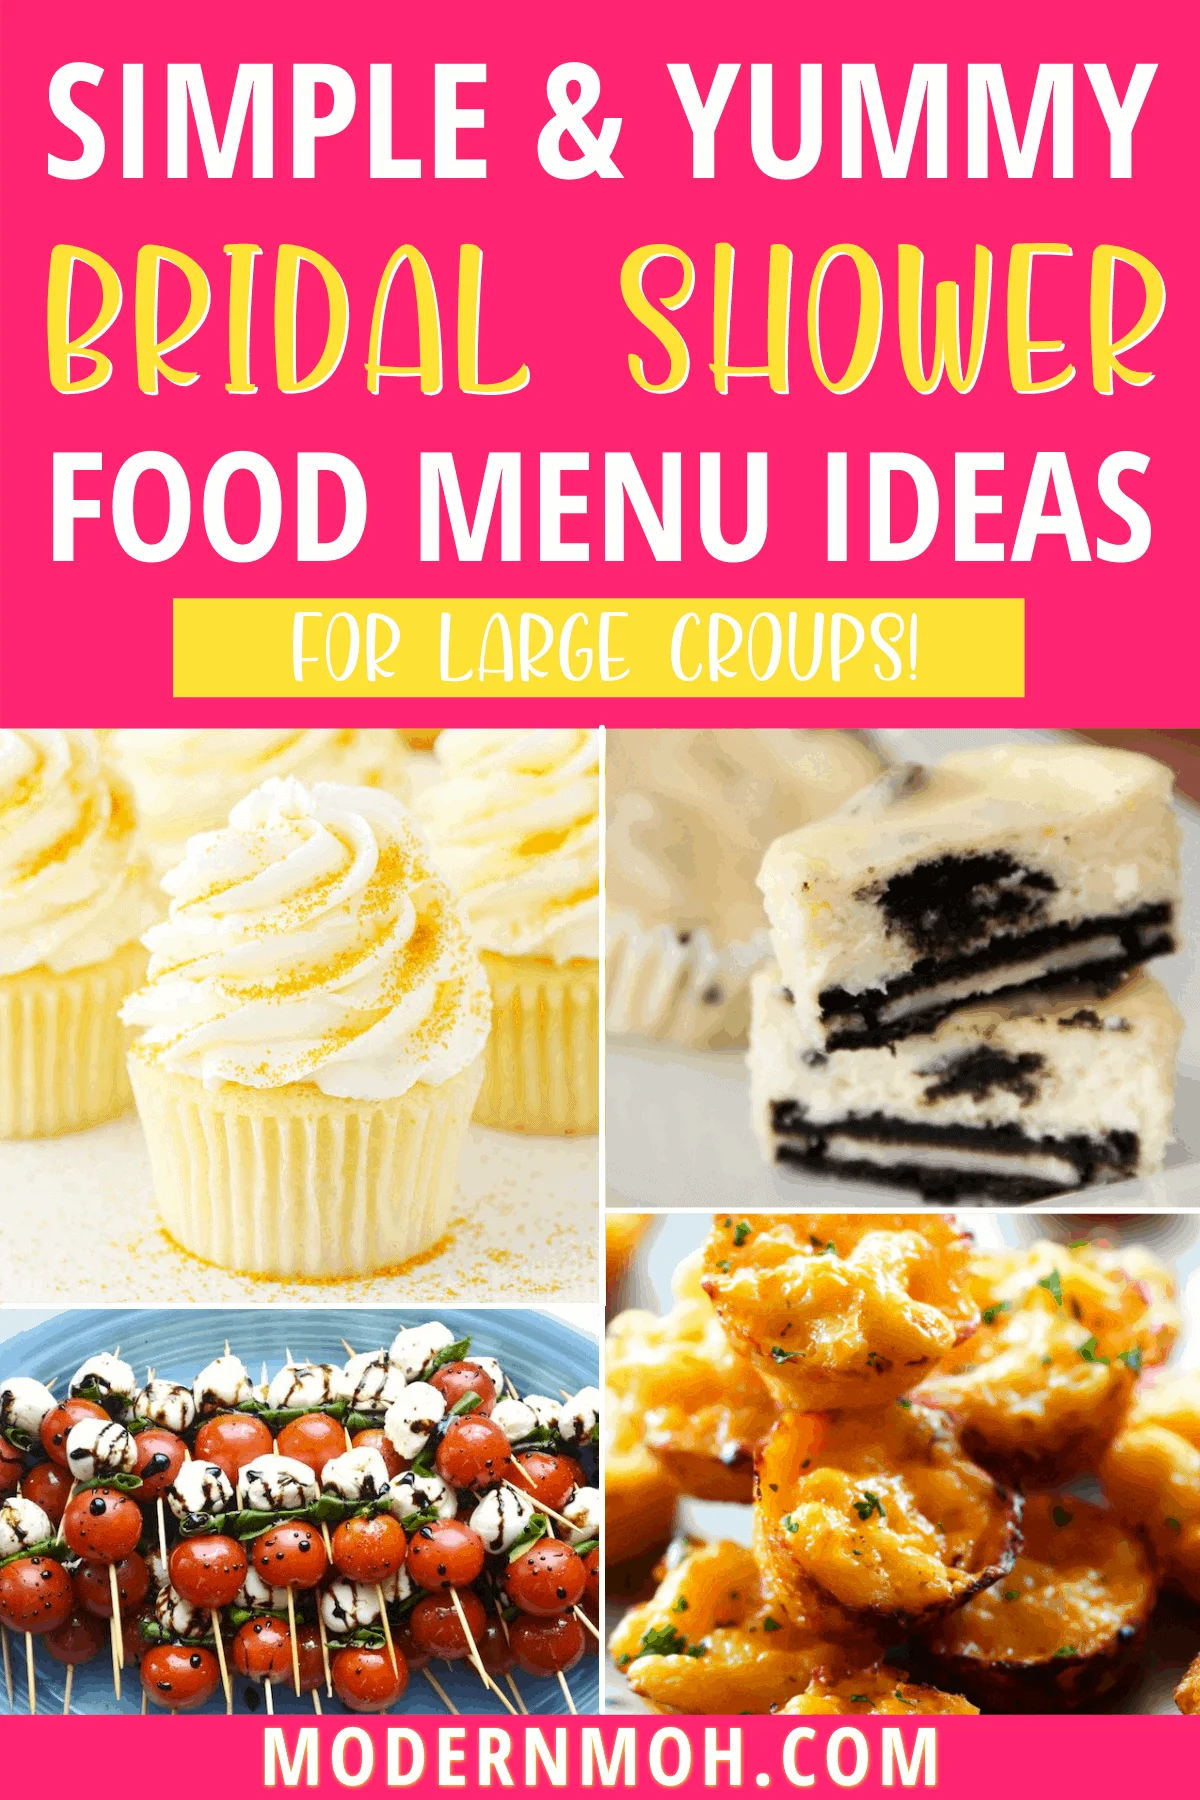 Bridal Shower Food Menu: A Basic Breakdown of Must-Have Eats and Treats